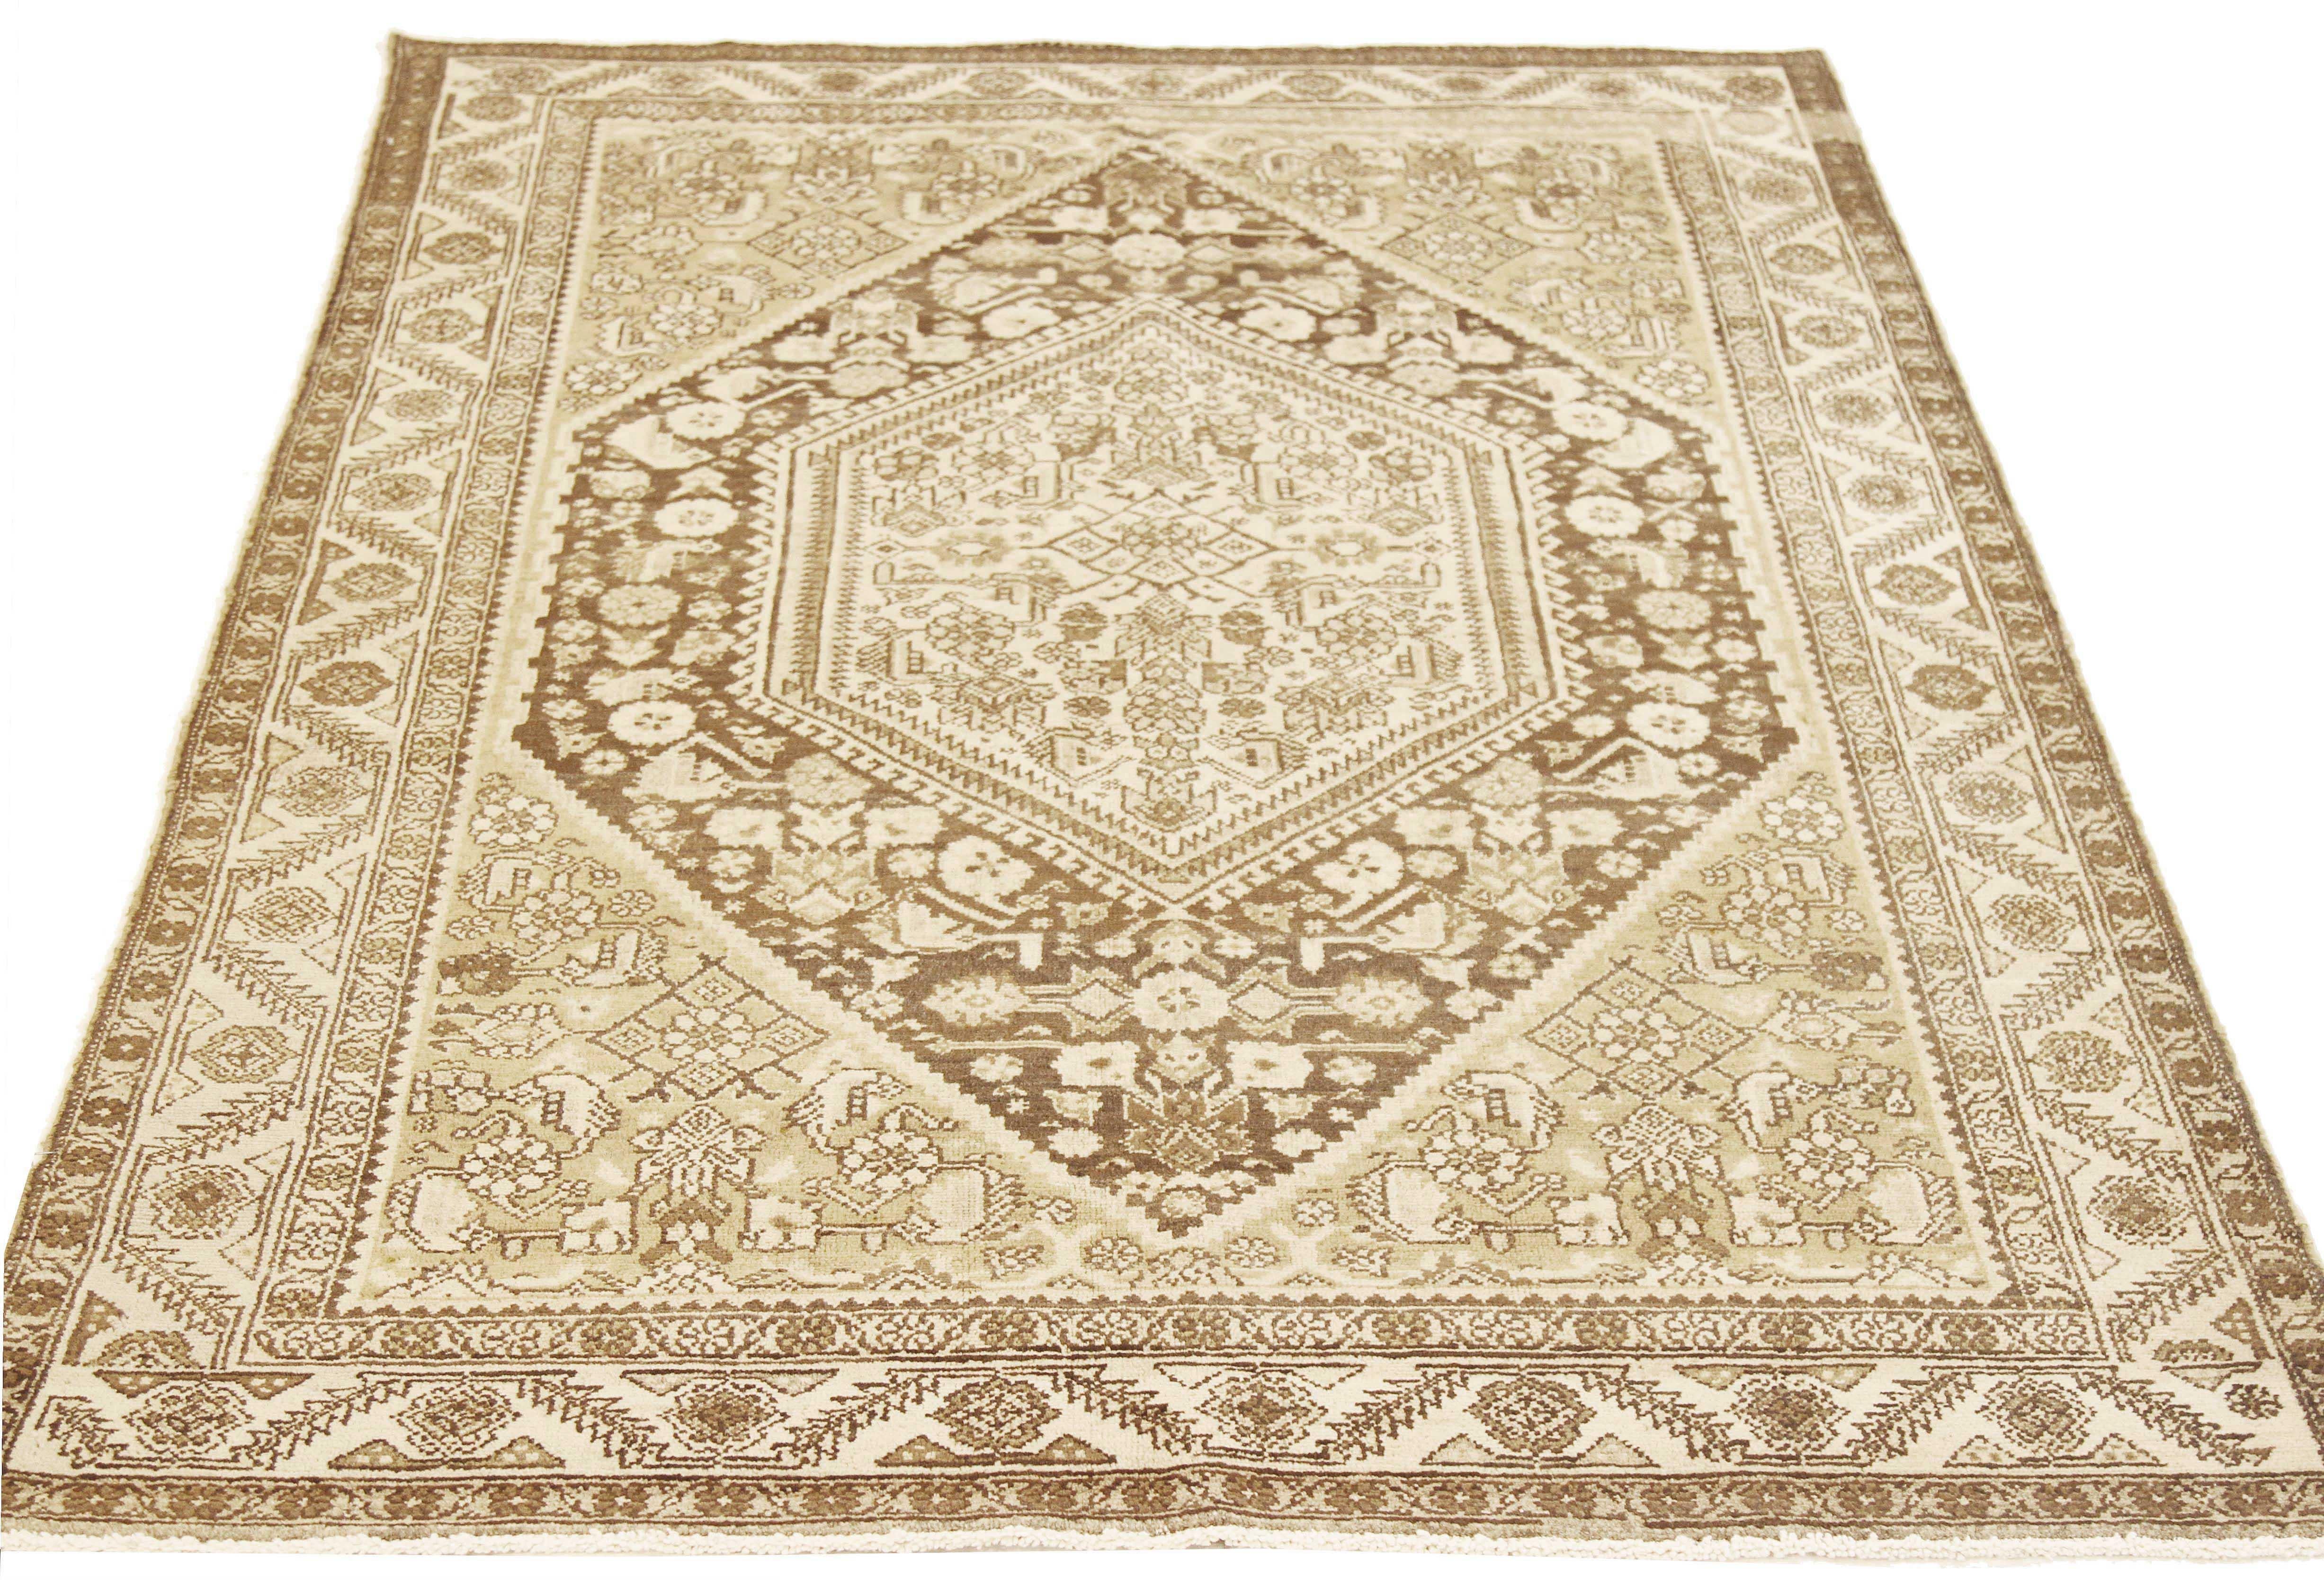 Antique Persian rug handwoven from the finest sheep’s wool and colored with all-natural vegetable dyes that are safe for humans and pets. It’s a traditional Gholtogh design featuring a brown central medallion on an ivory field. It’s a lovely piece